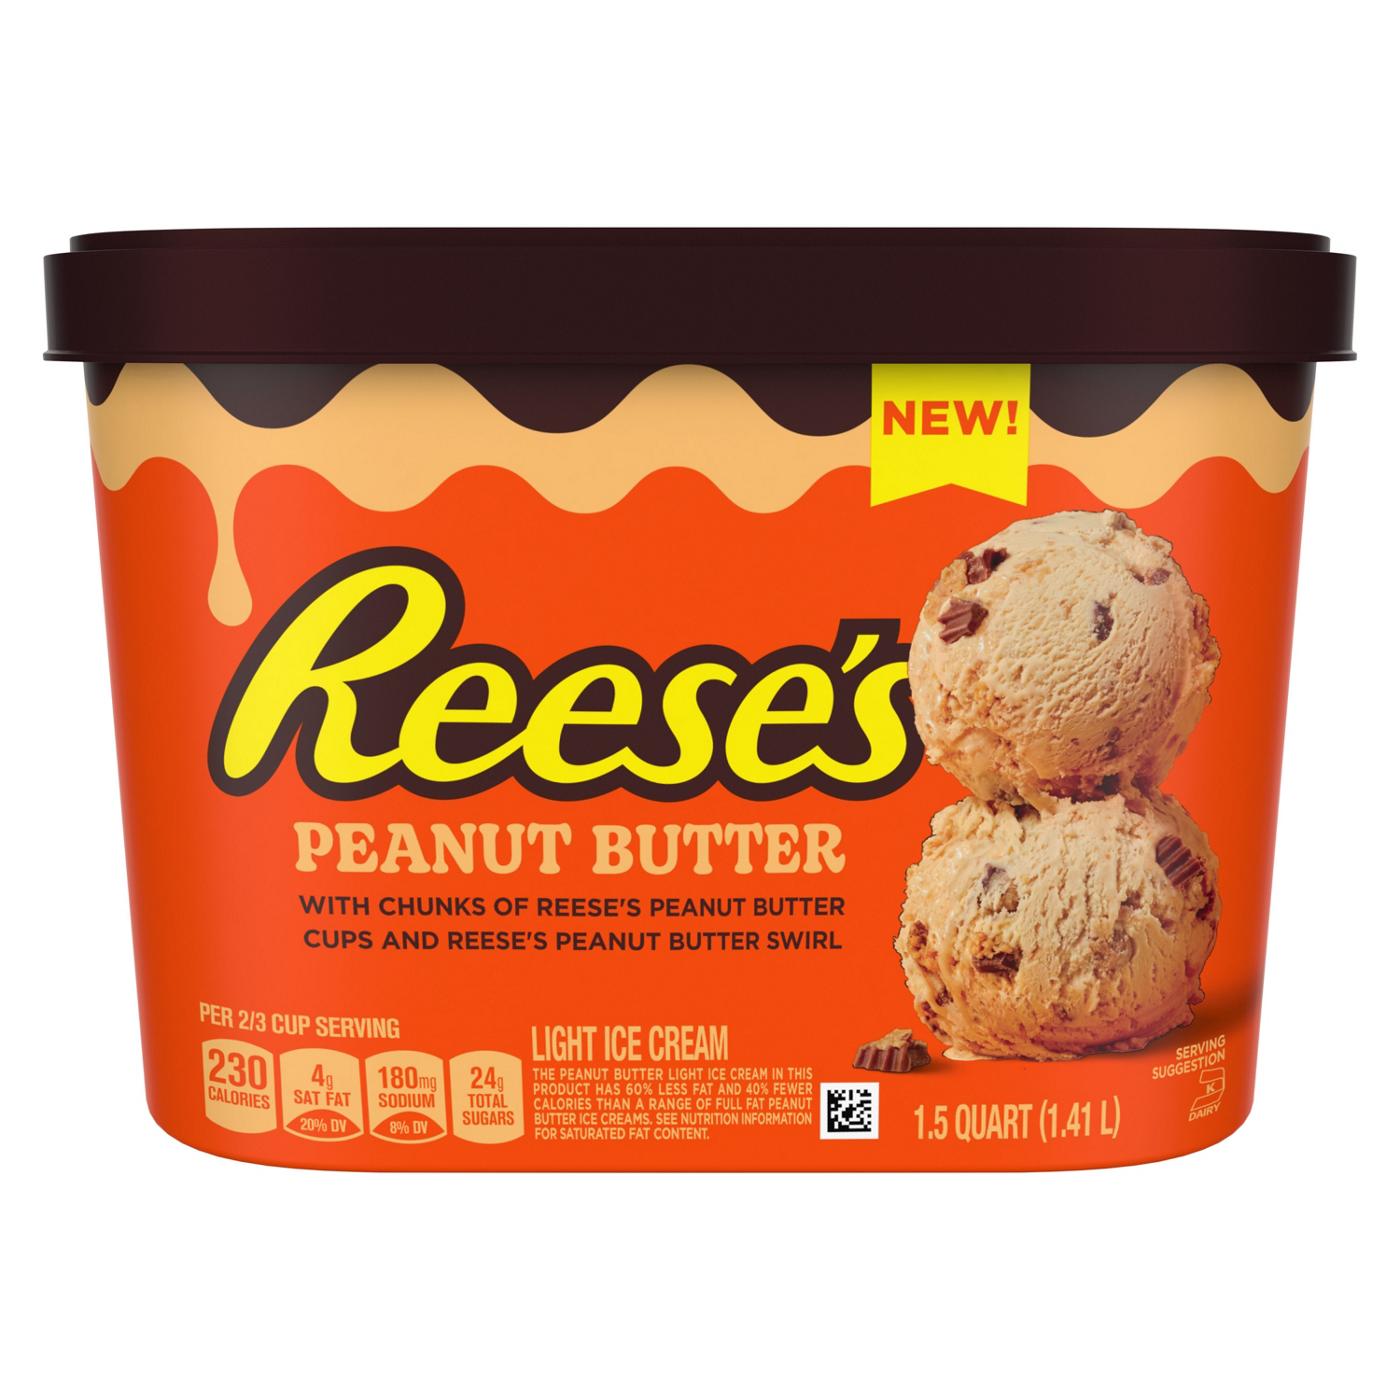 Reese's Peanut Butter Light Ice Cream with Reese's Peanut Butter Cups & Peanut Butter Swirl; image 1 of 7